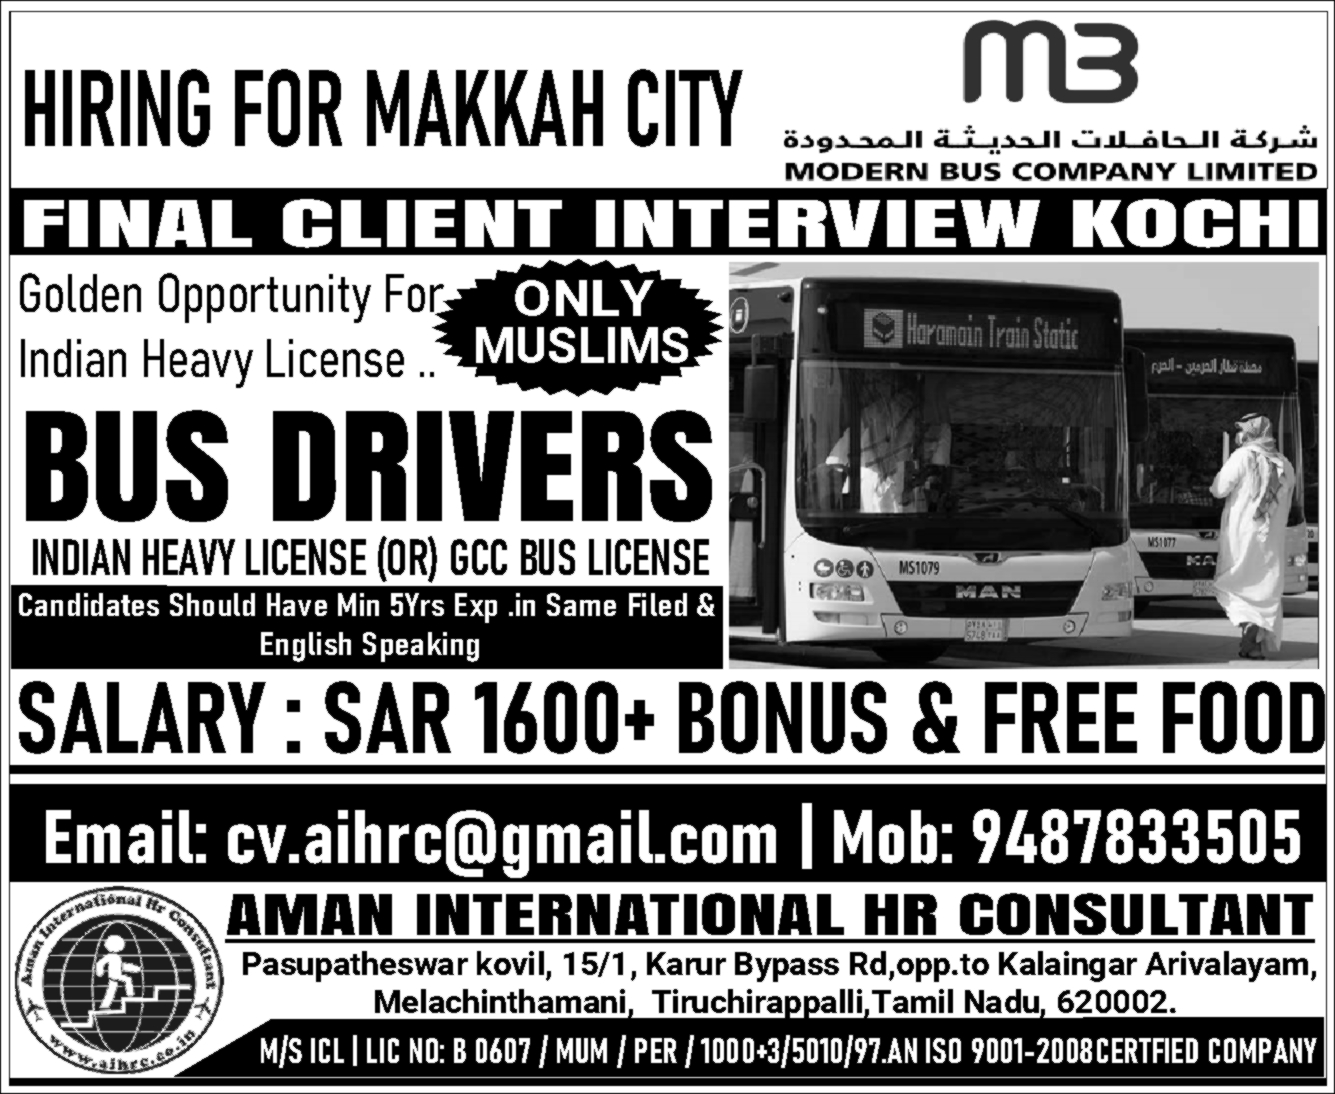 We are hiring for Makkah 